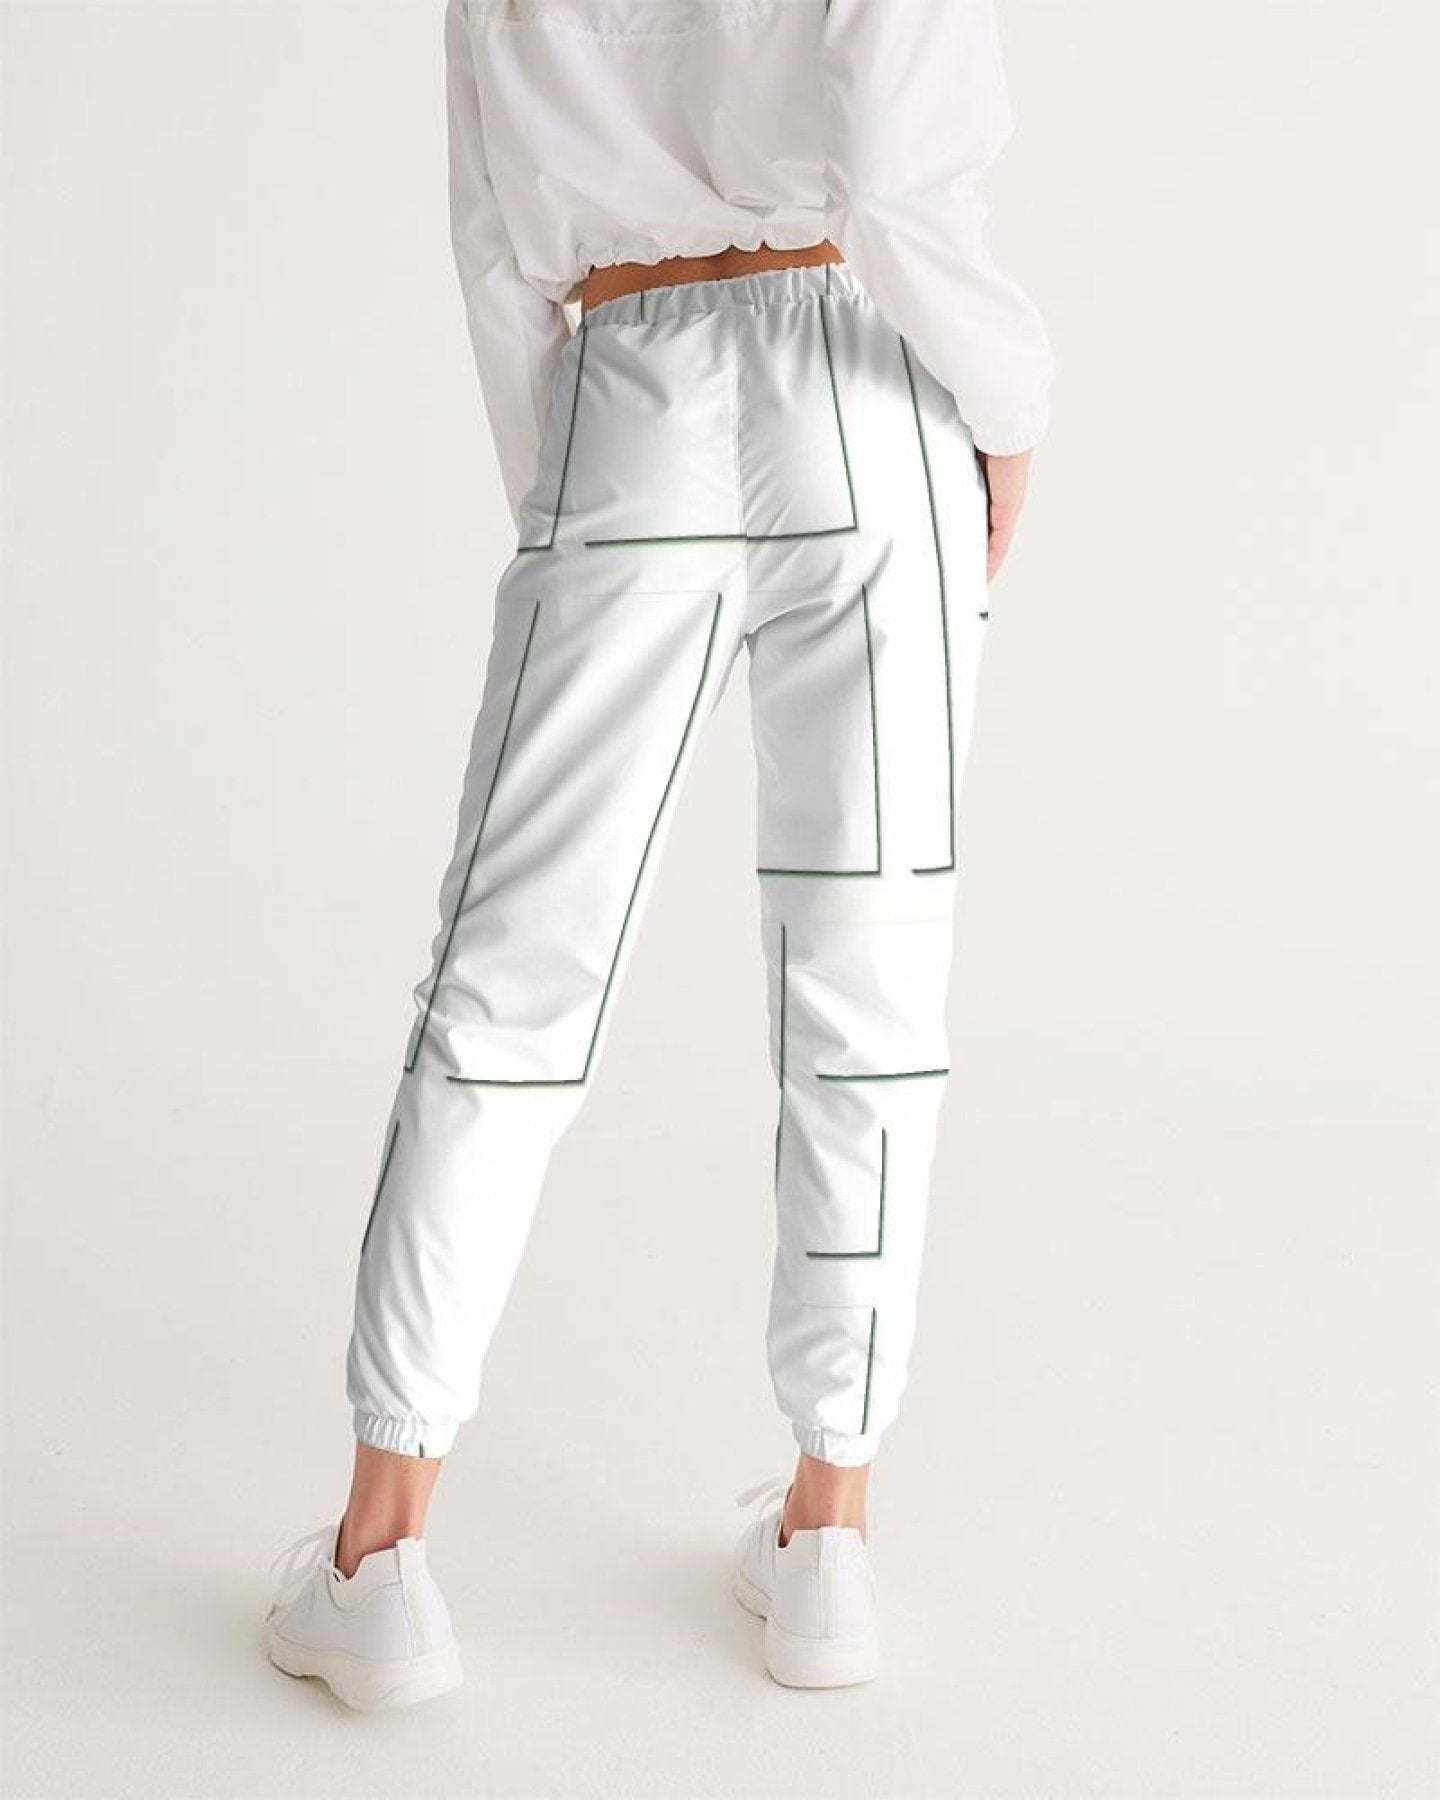 Womens Athletics, White And Gray Line Style Track Pants